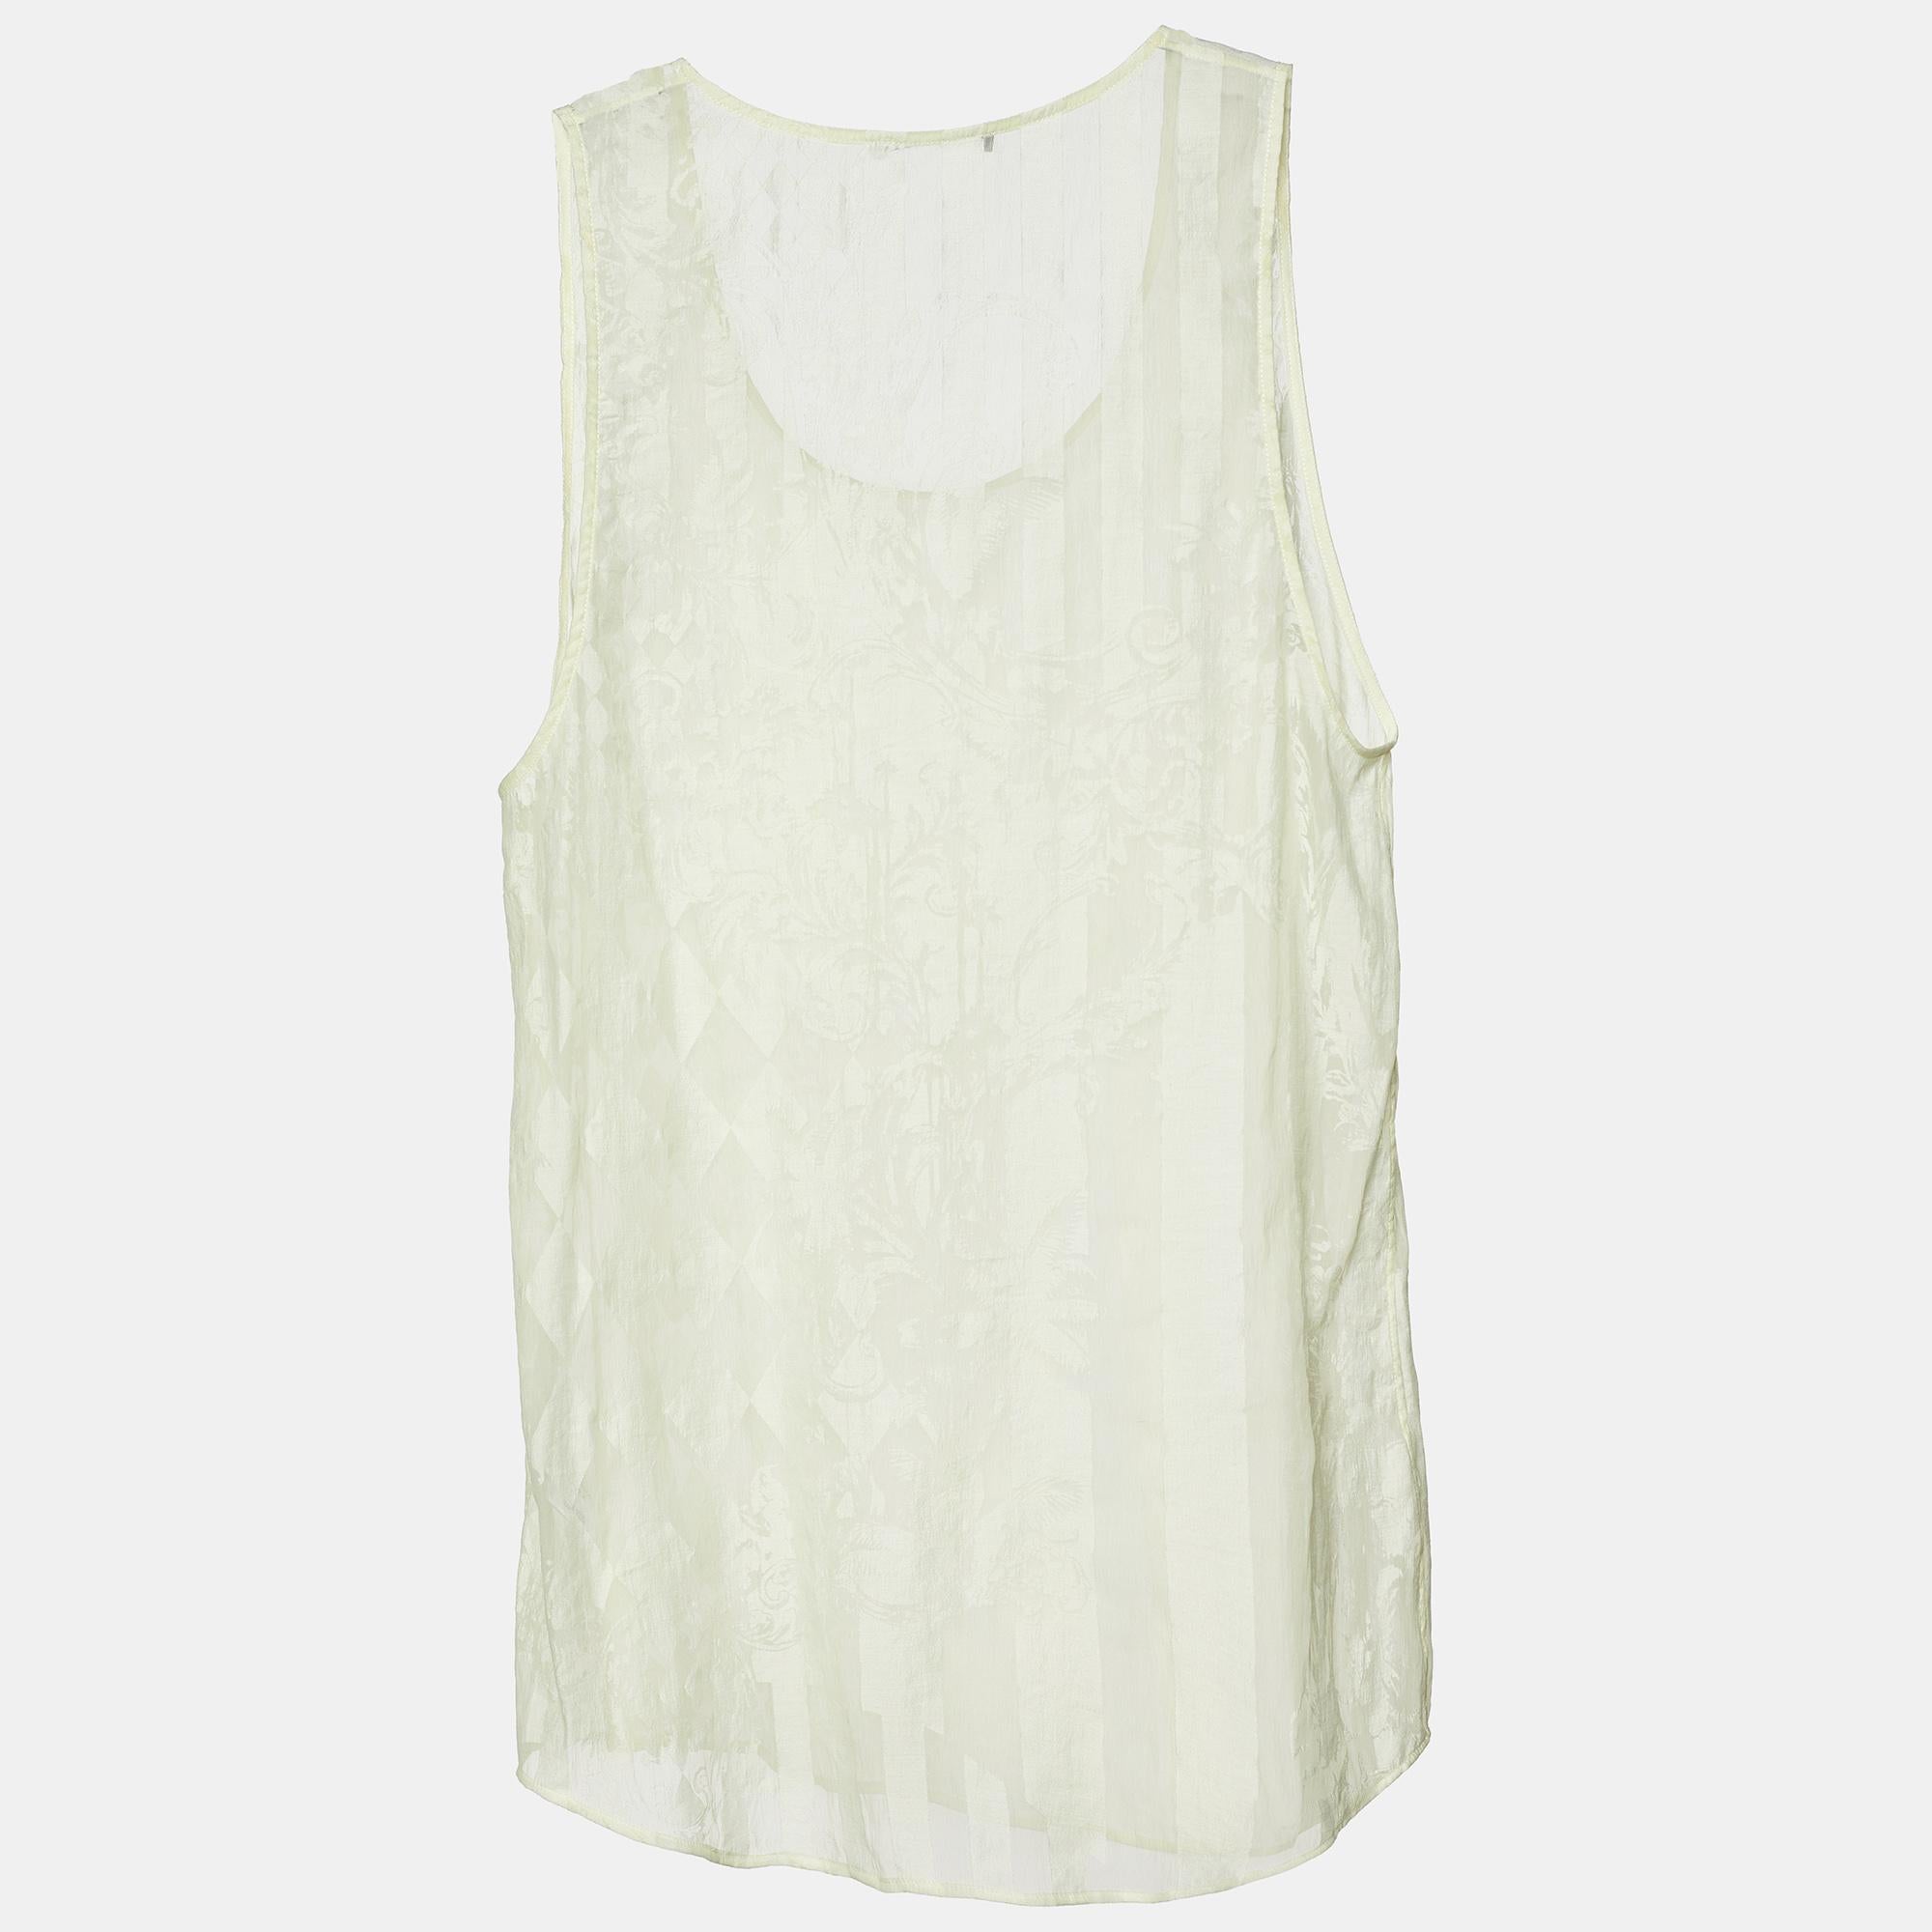 Easy to pair with skirts, jeans, or tailored pants, this Balmain tank top ensures versatile styling options. Made using quality fabrics, it features a scoop neckline, patterns all over, and a comfortable, loose fit.

